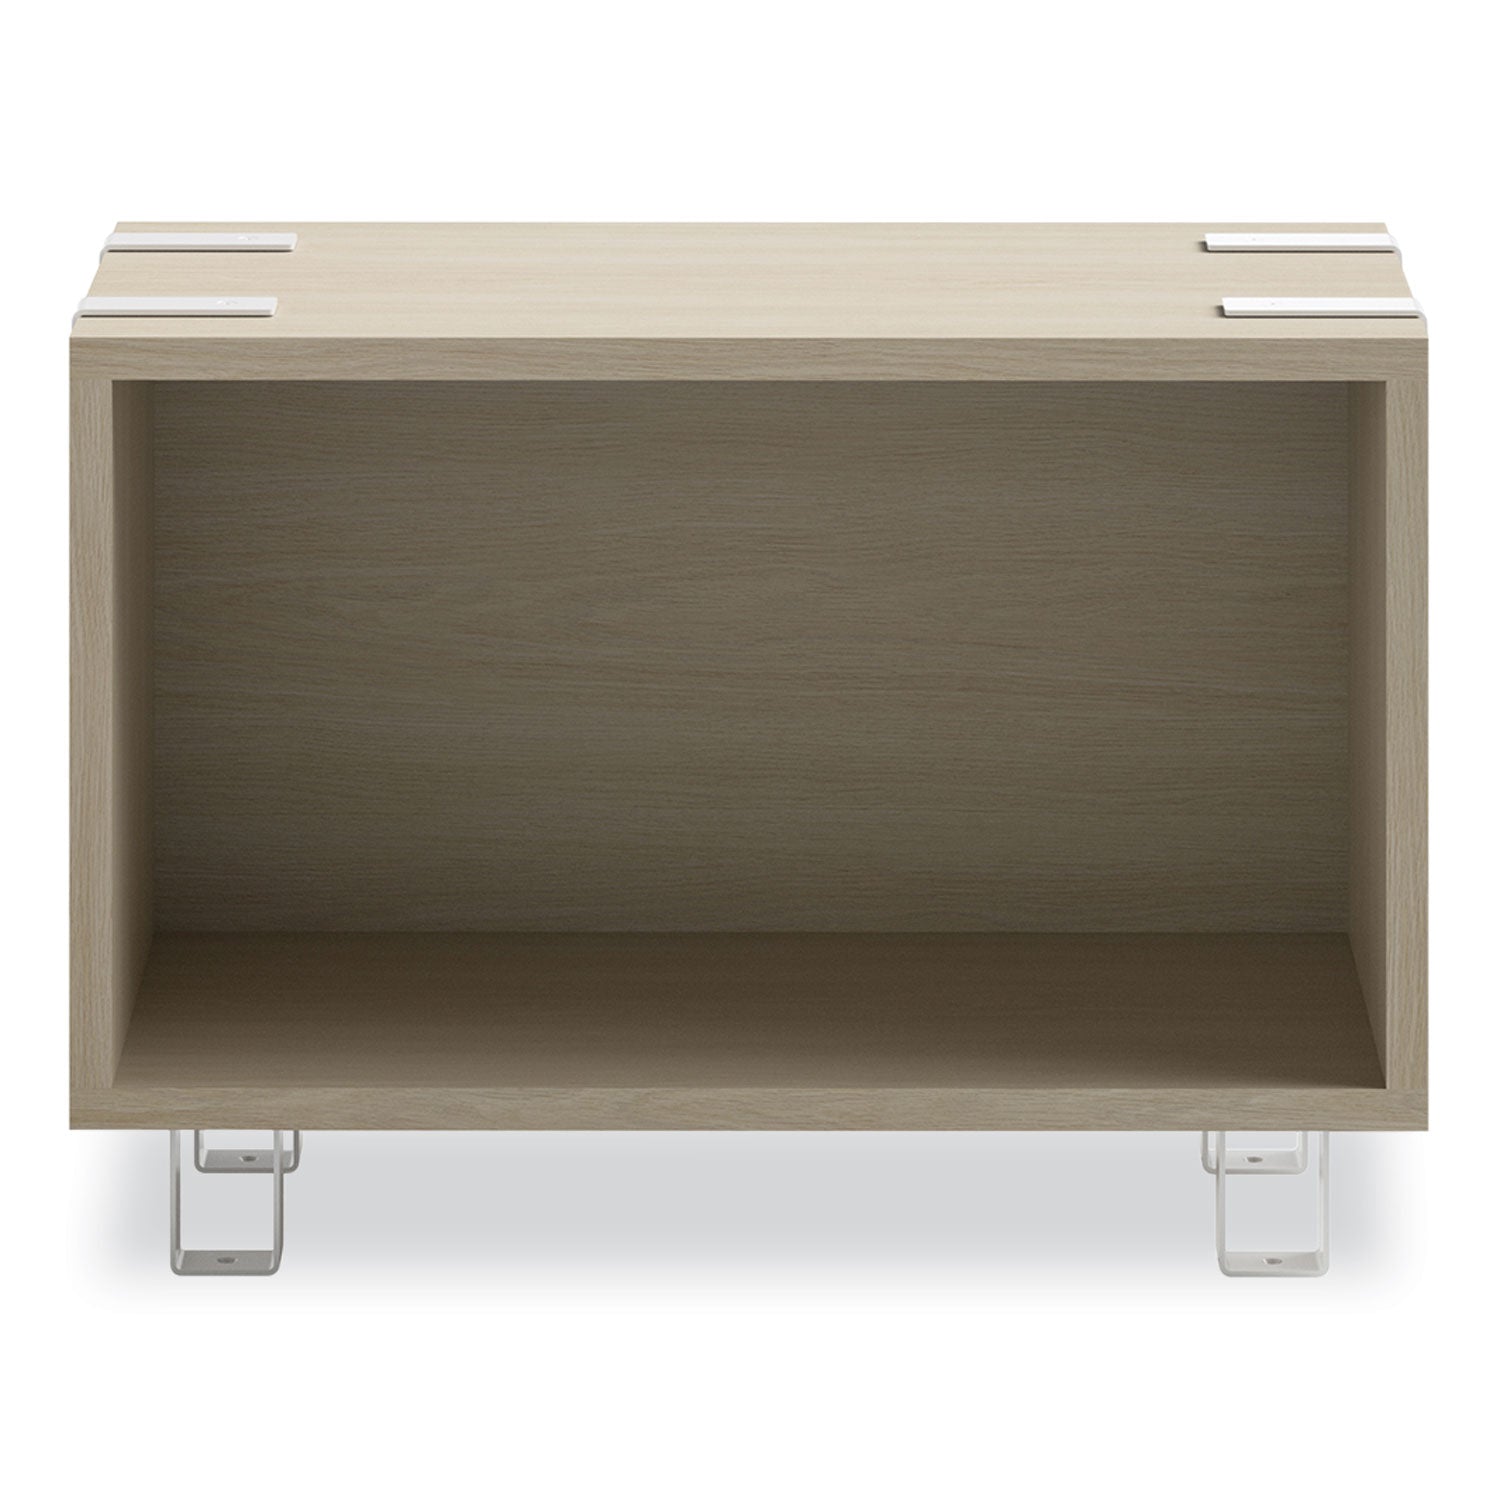 ready-home-office-large-stackable-storage-1-shelf-24w-x-12d-x-1725h-beige-white-ships-in-1-3-business-days_saf5509whna - 2